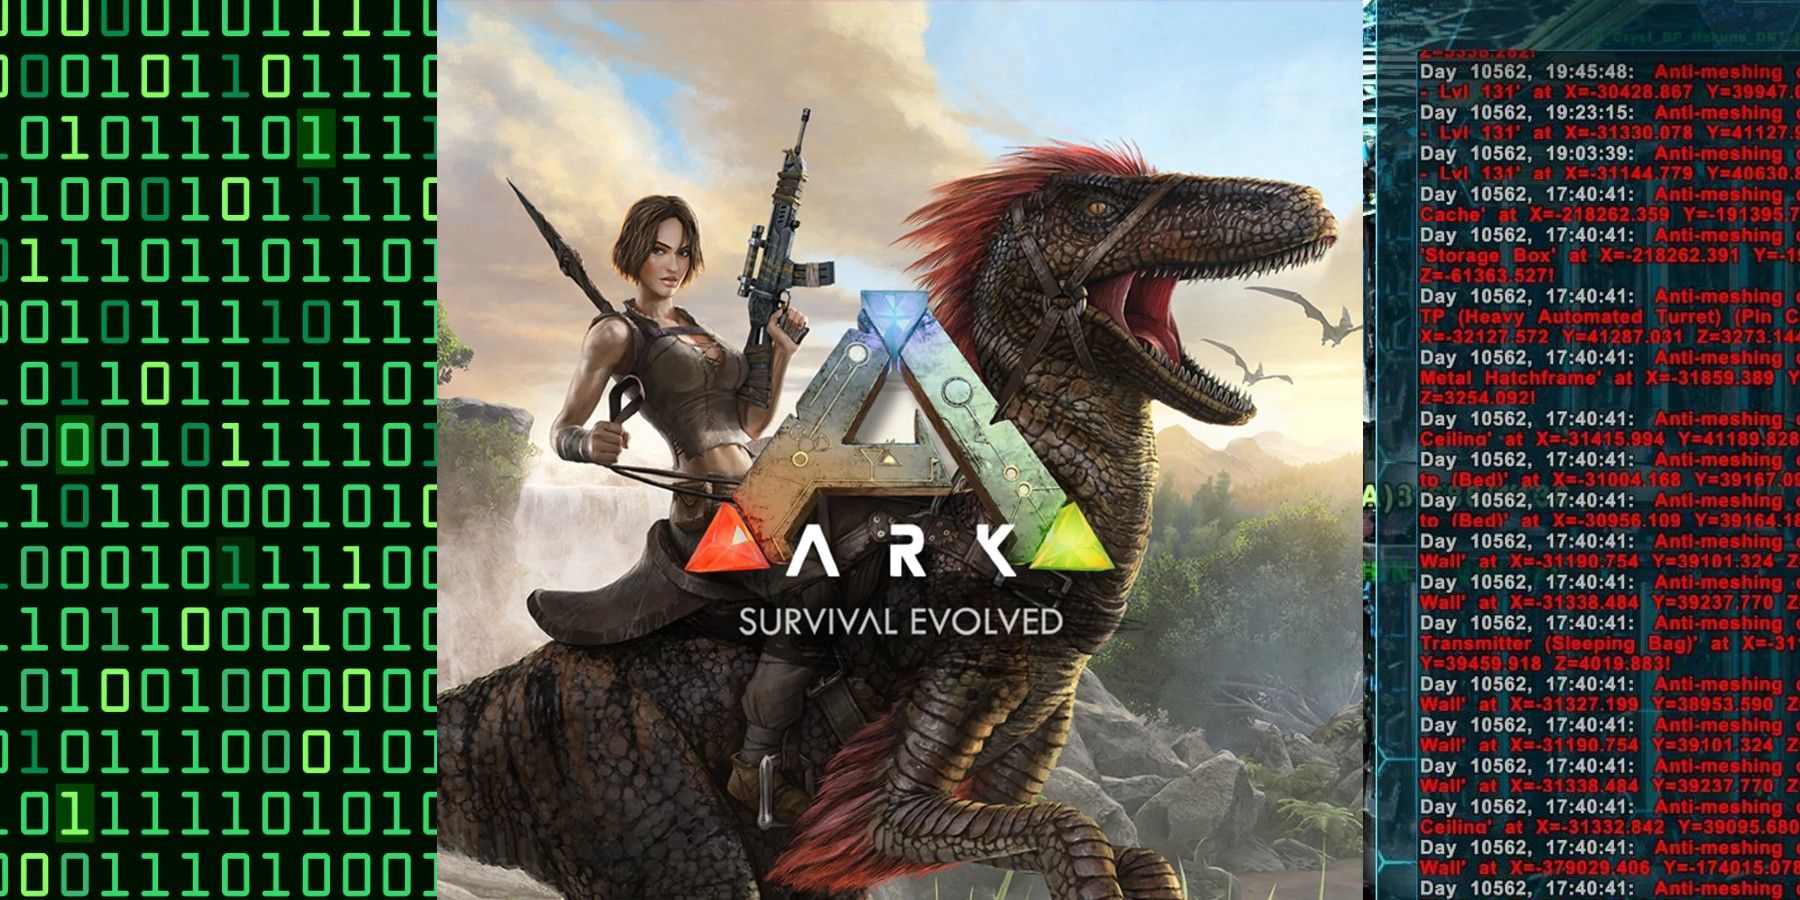 ARK Survival Evolved’s Long Battle Against Hackers and Cheaters